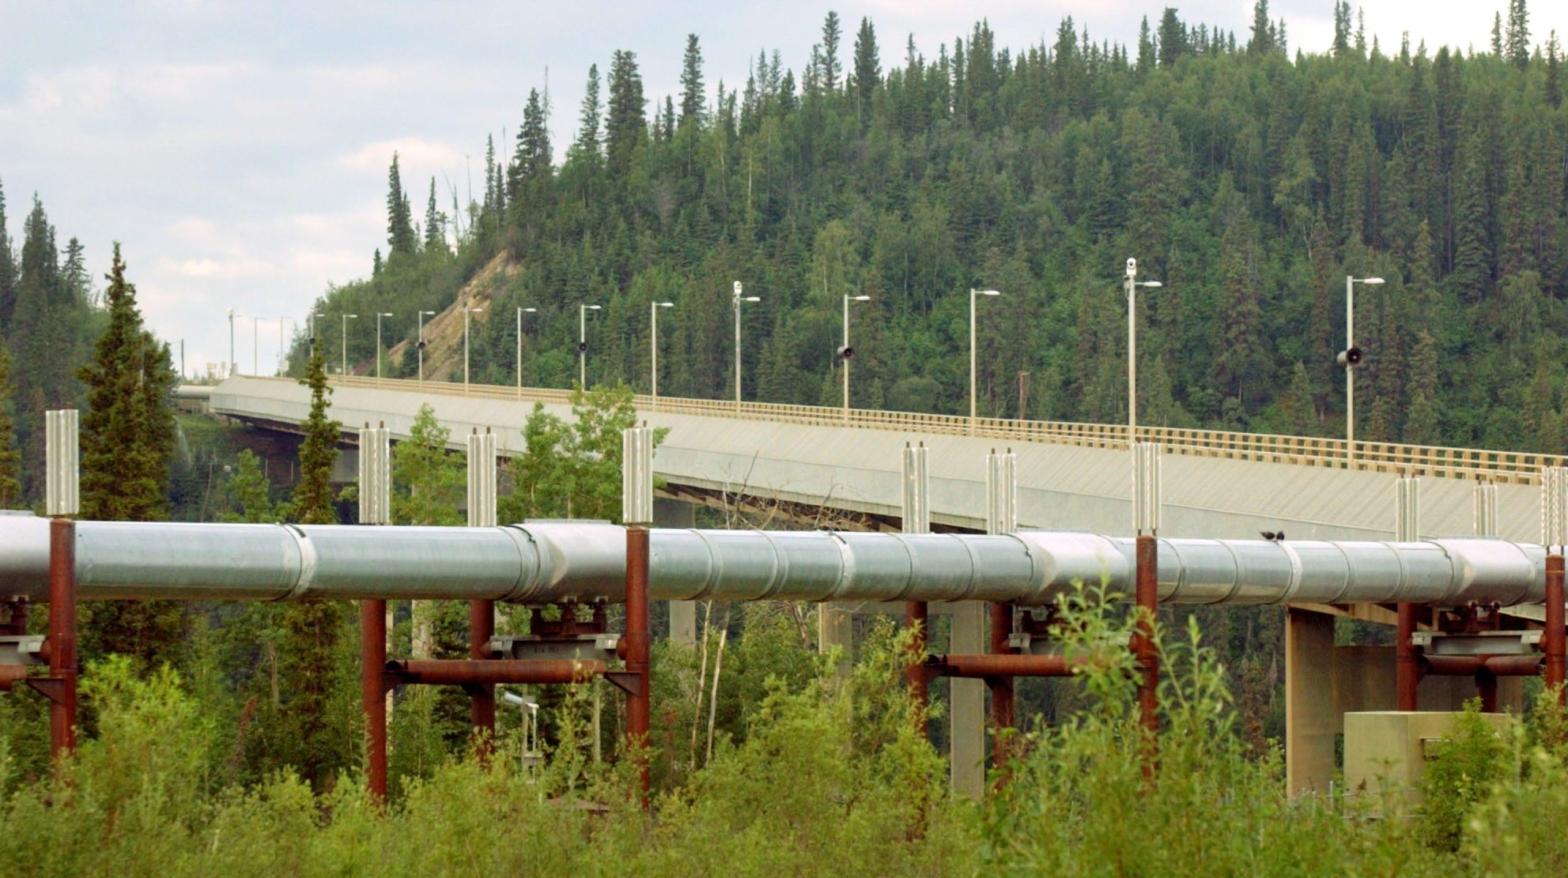 The Trans-Alaska Pipeline. (Photo: Barry Williams, Getty Images)